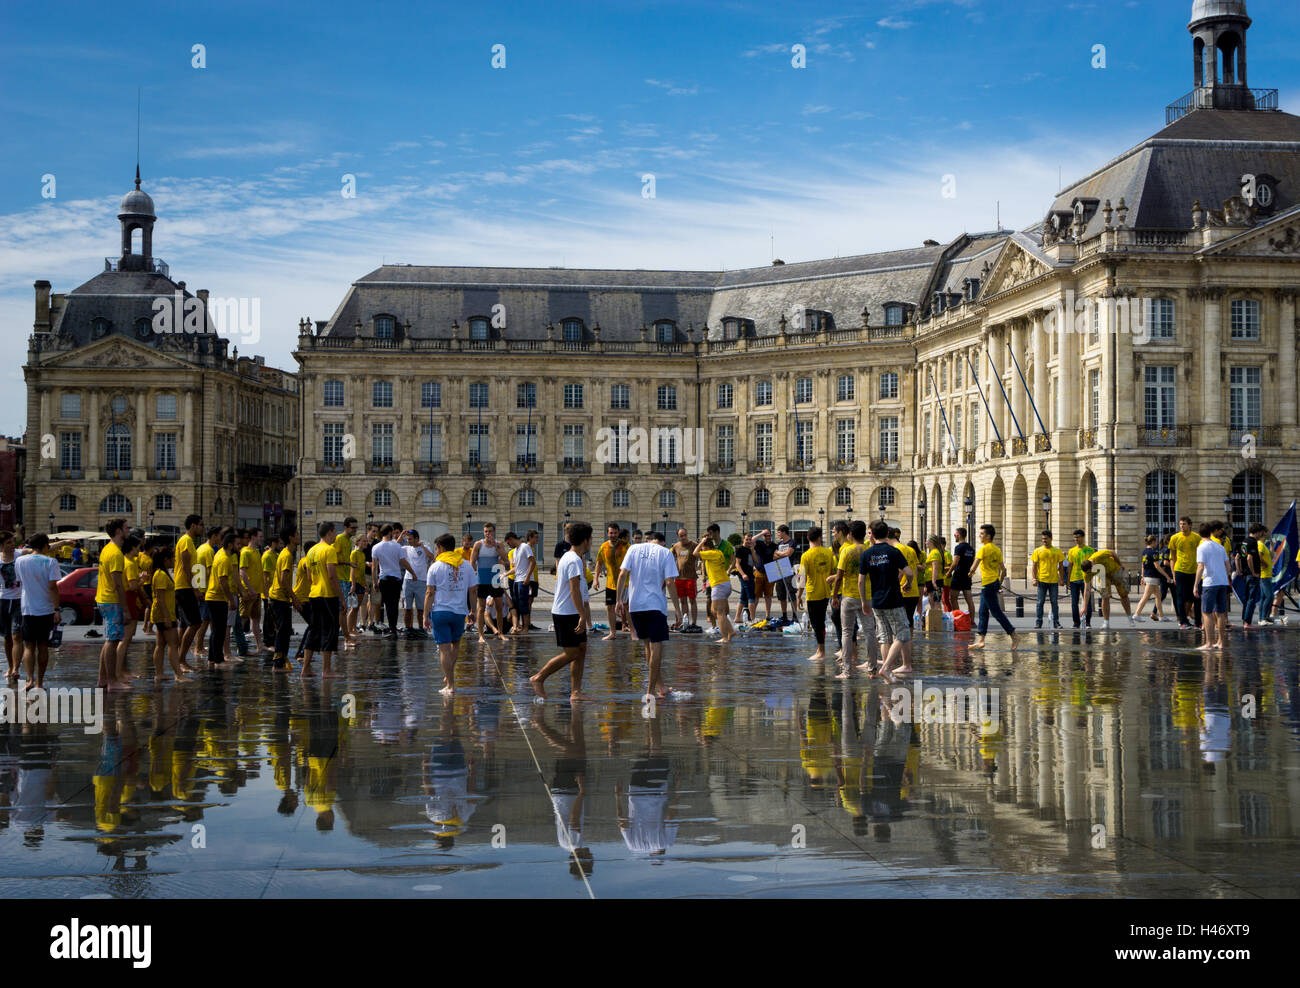 Revelers enjoy games on the  Miroir d'Eau (a large reflecting pool) in front of the Place de la Bourse in Bordeaux, France Stock Photo